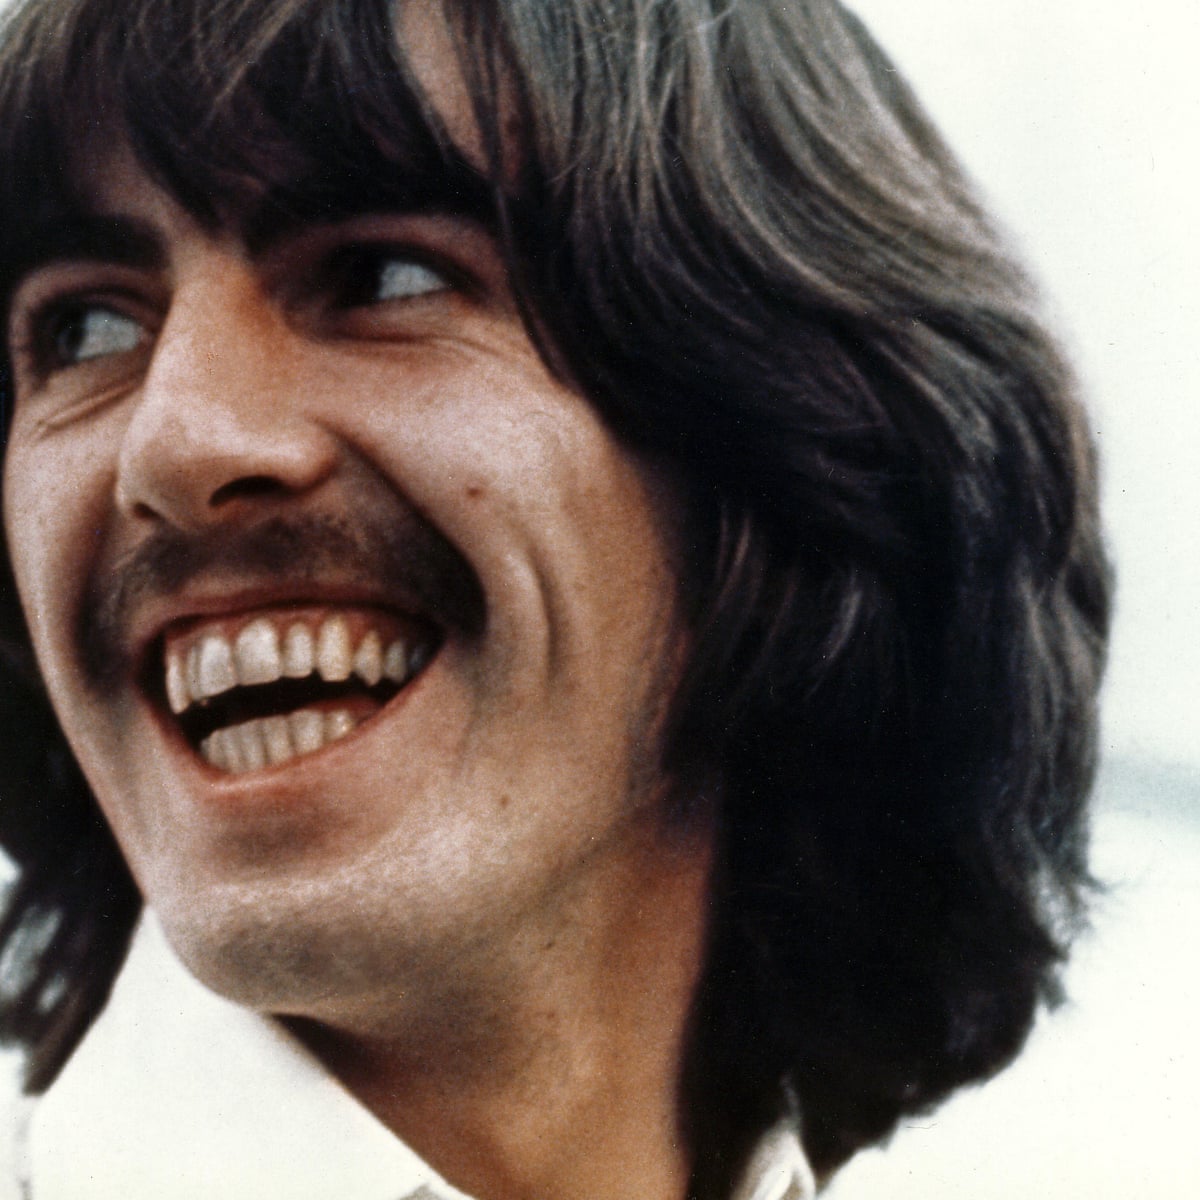 Liverpool to honour George Harrison with woodland walk memorial | Liverpool  | The Guardian